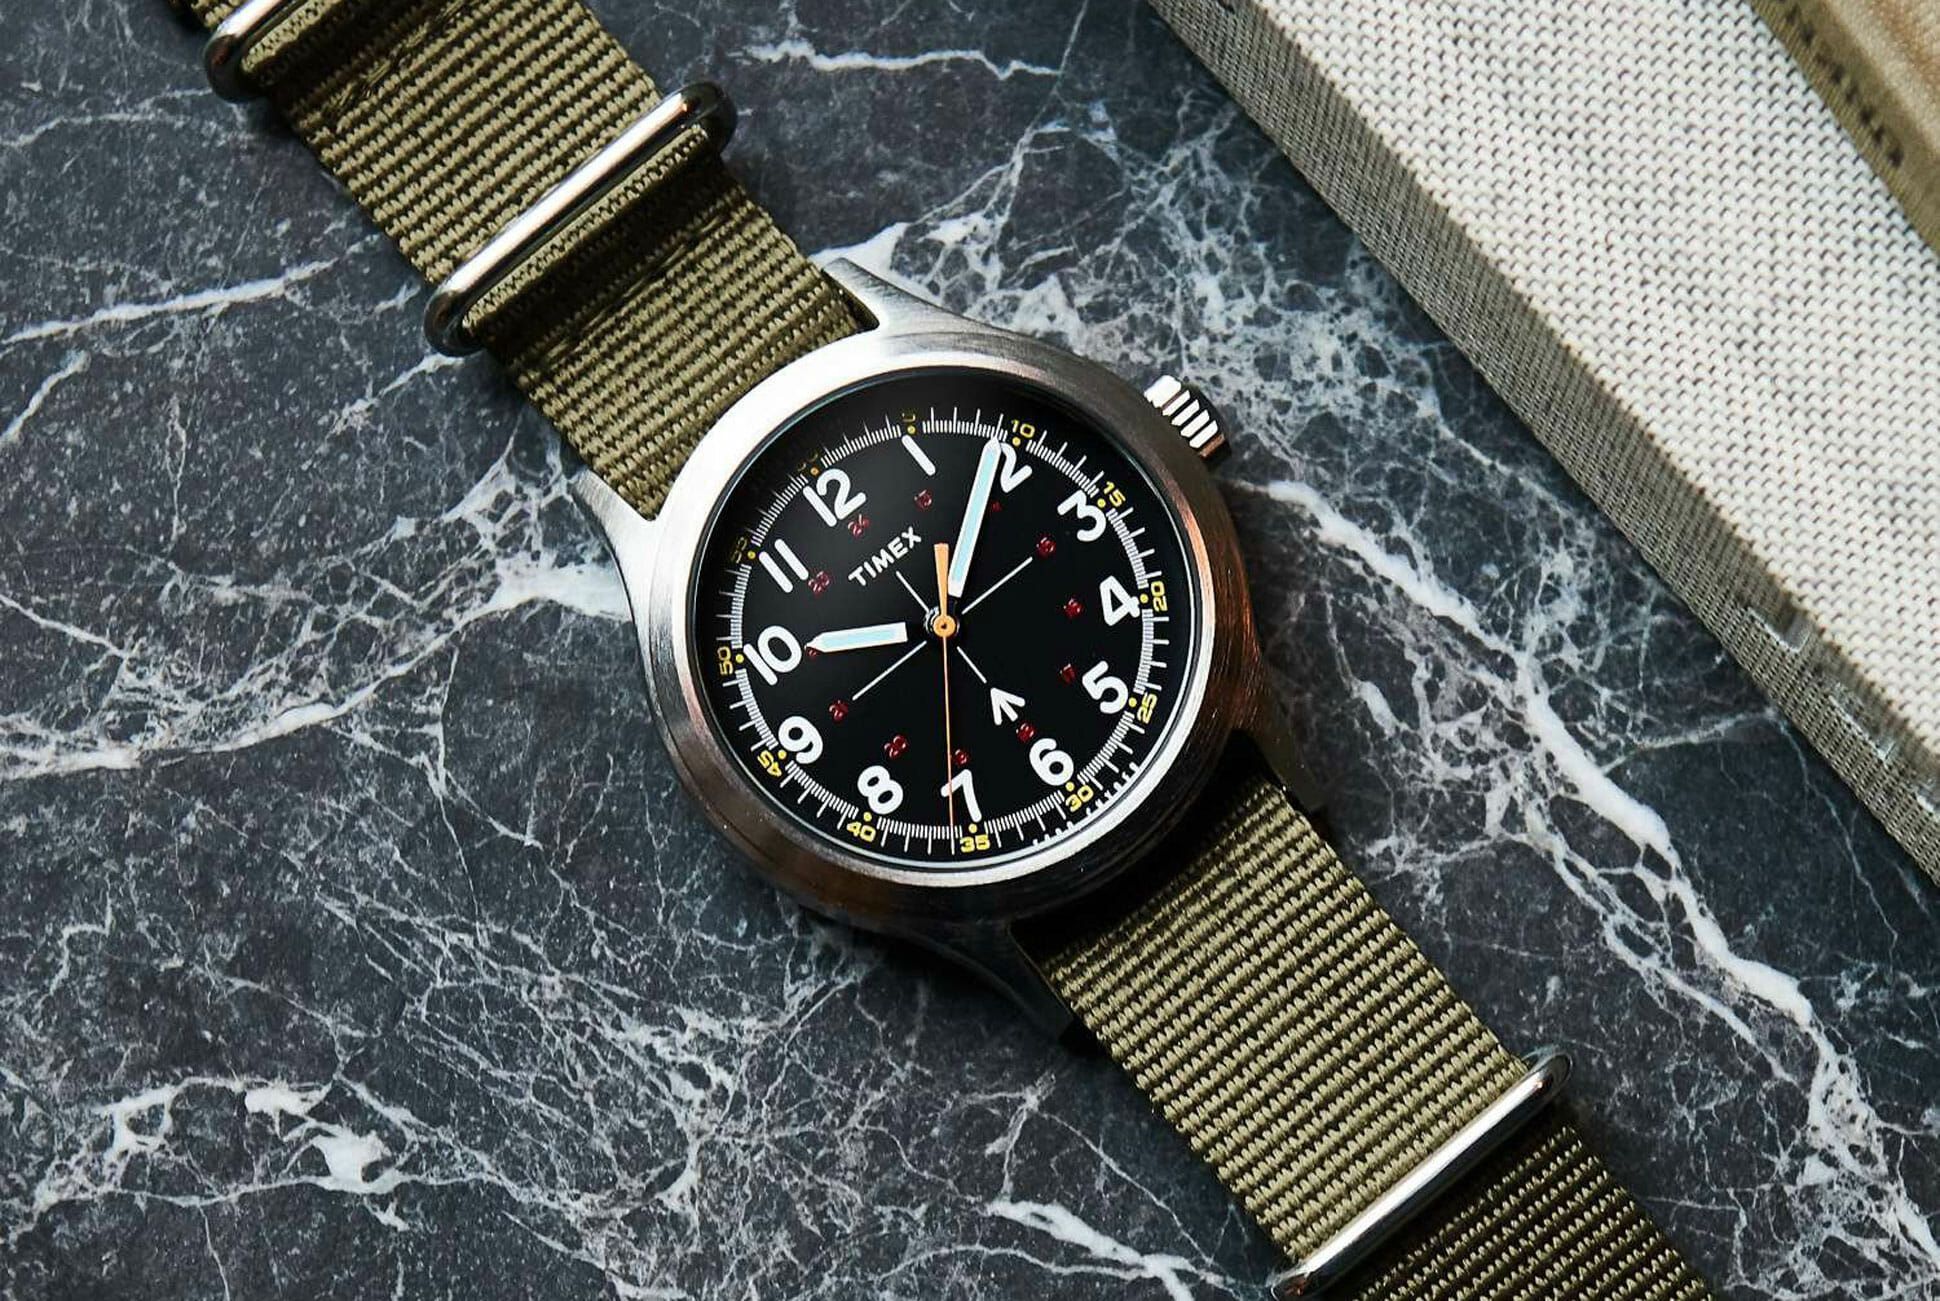 This Military-Inspired Watch Is Just $94